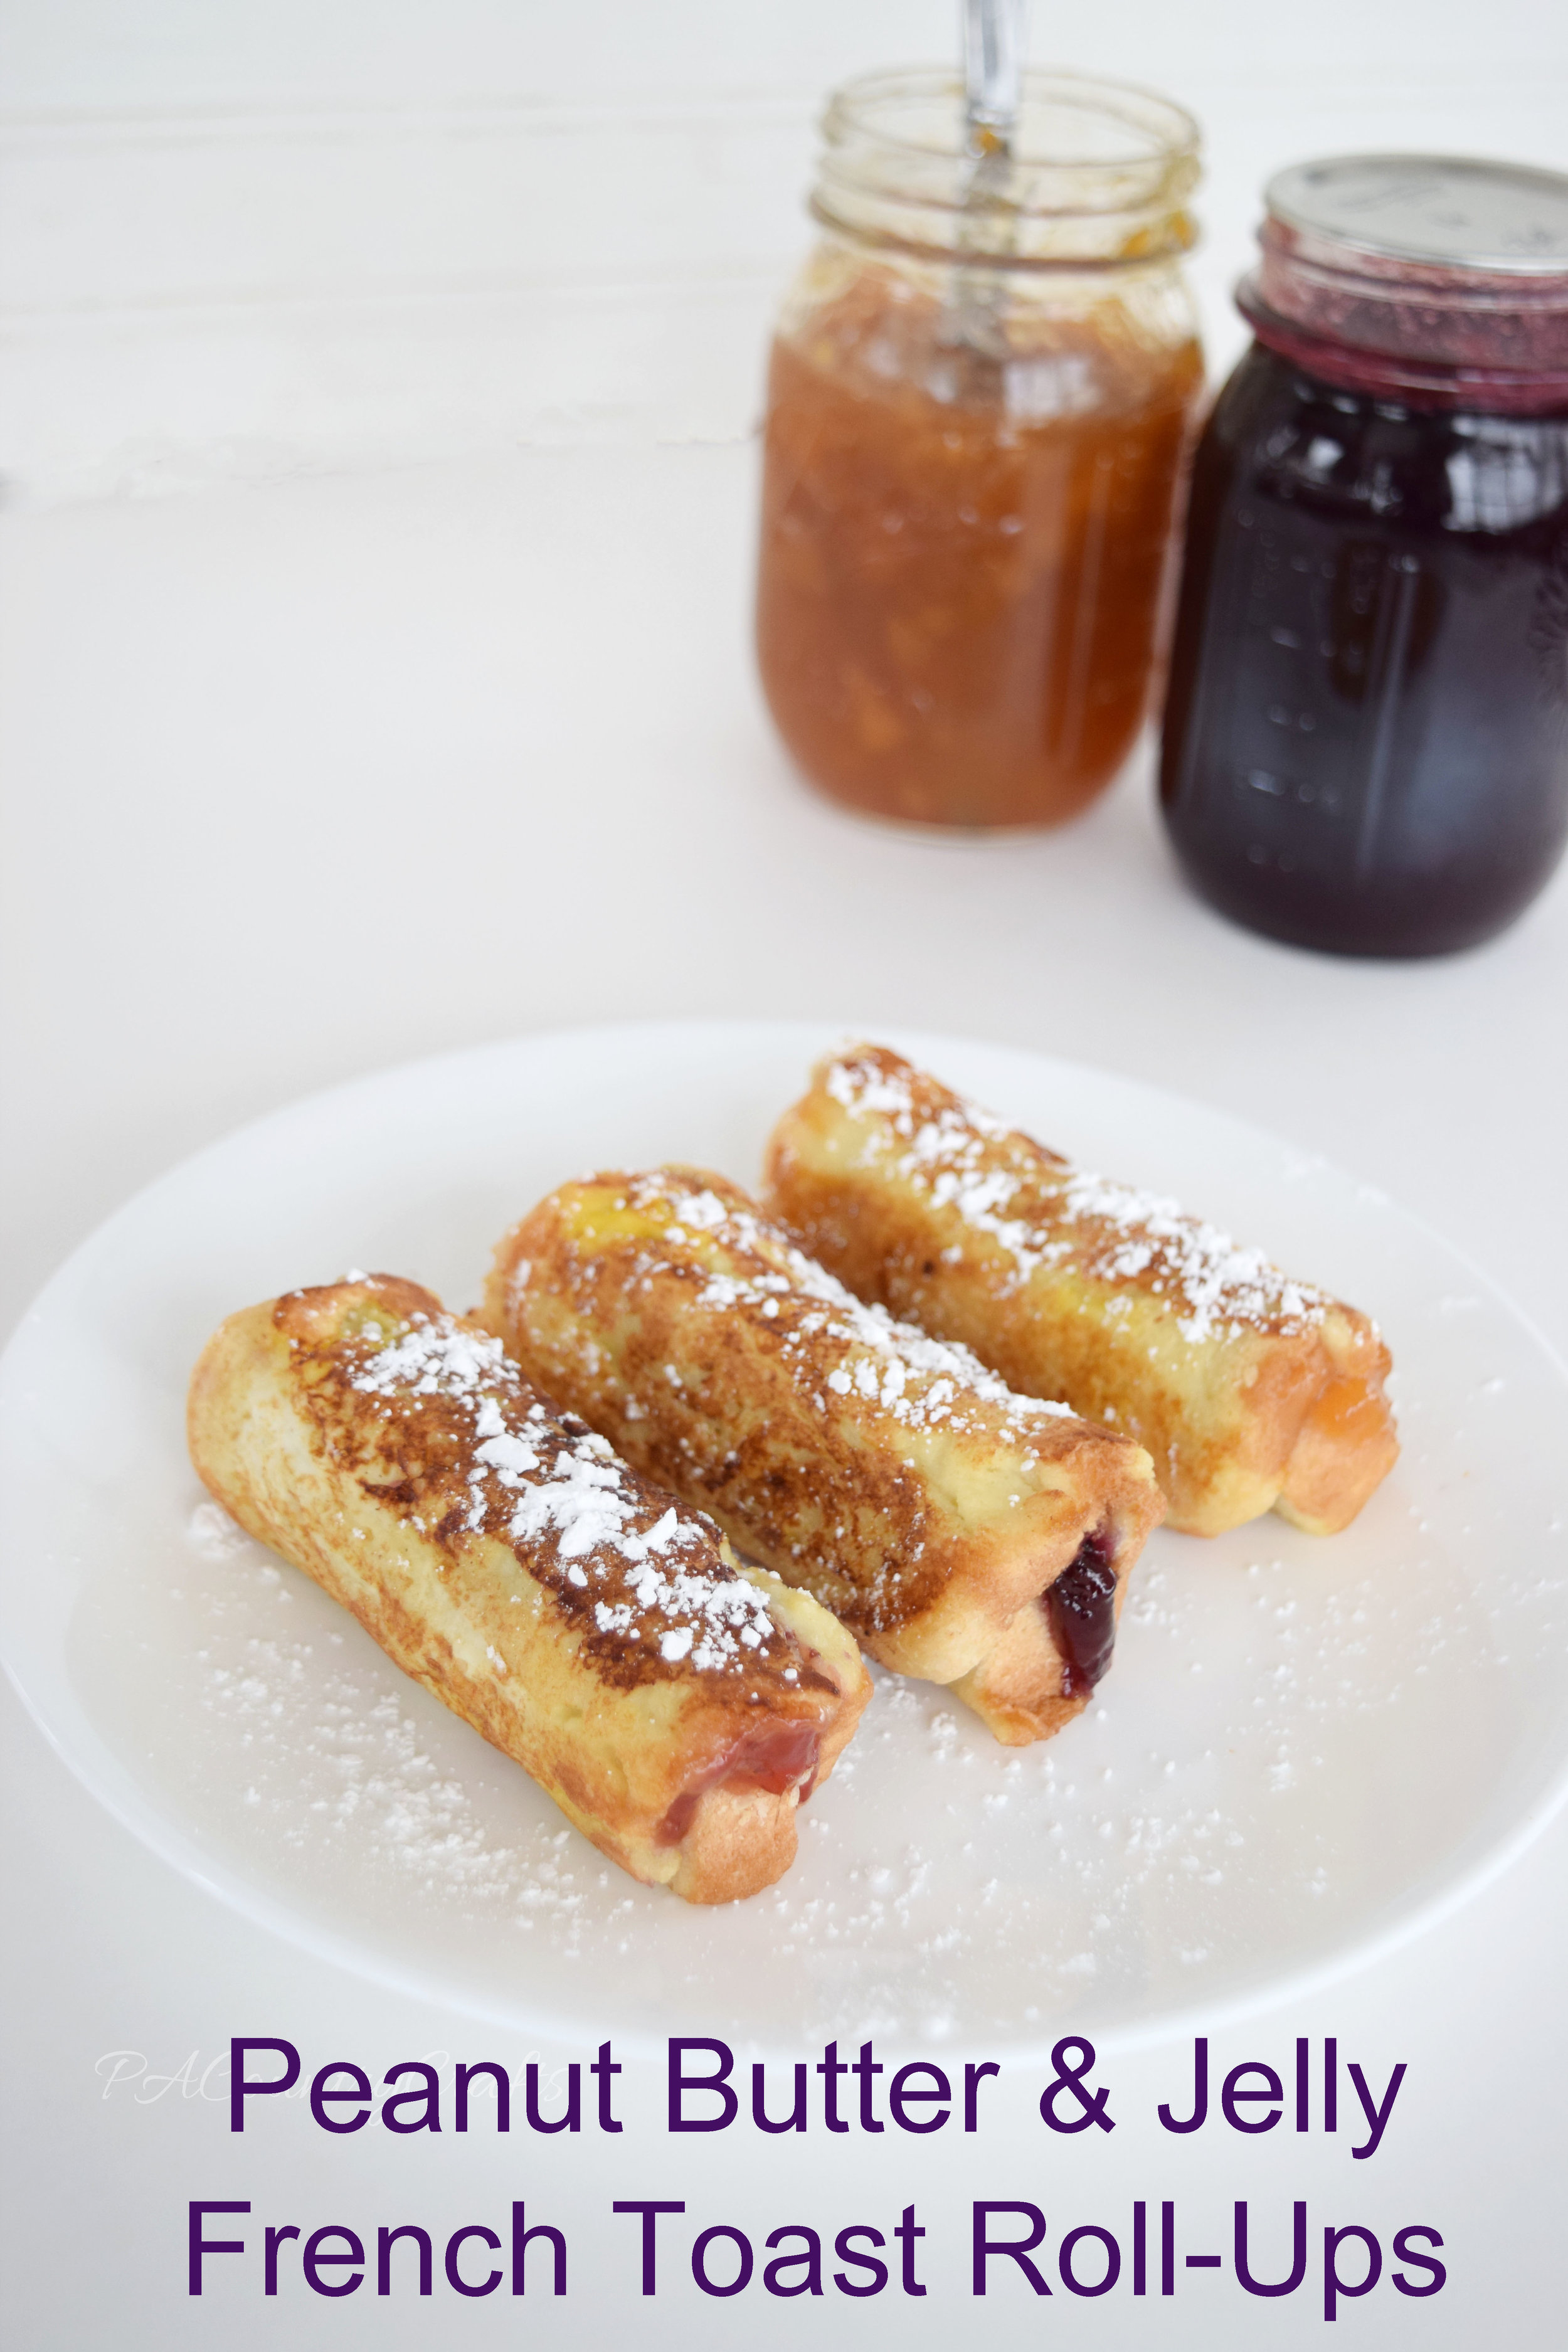 A fun breakfast idea for the kids- peanut butter and jelly french toast roll-ups!